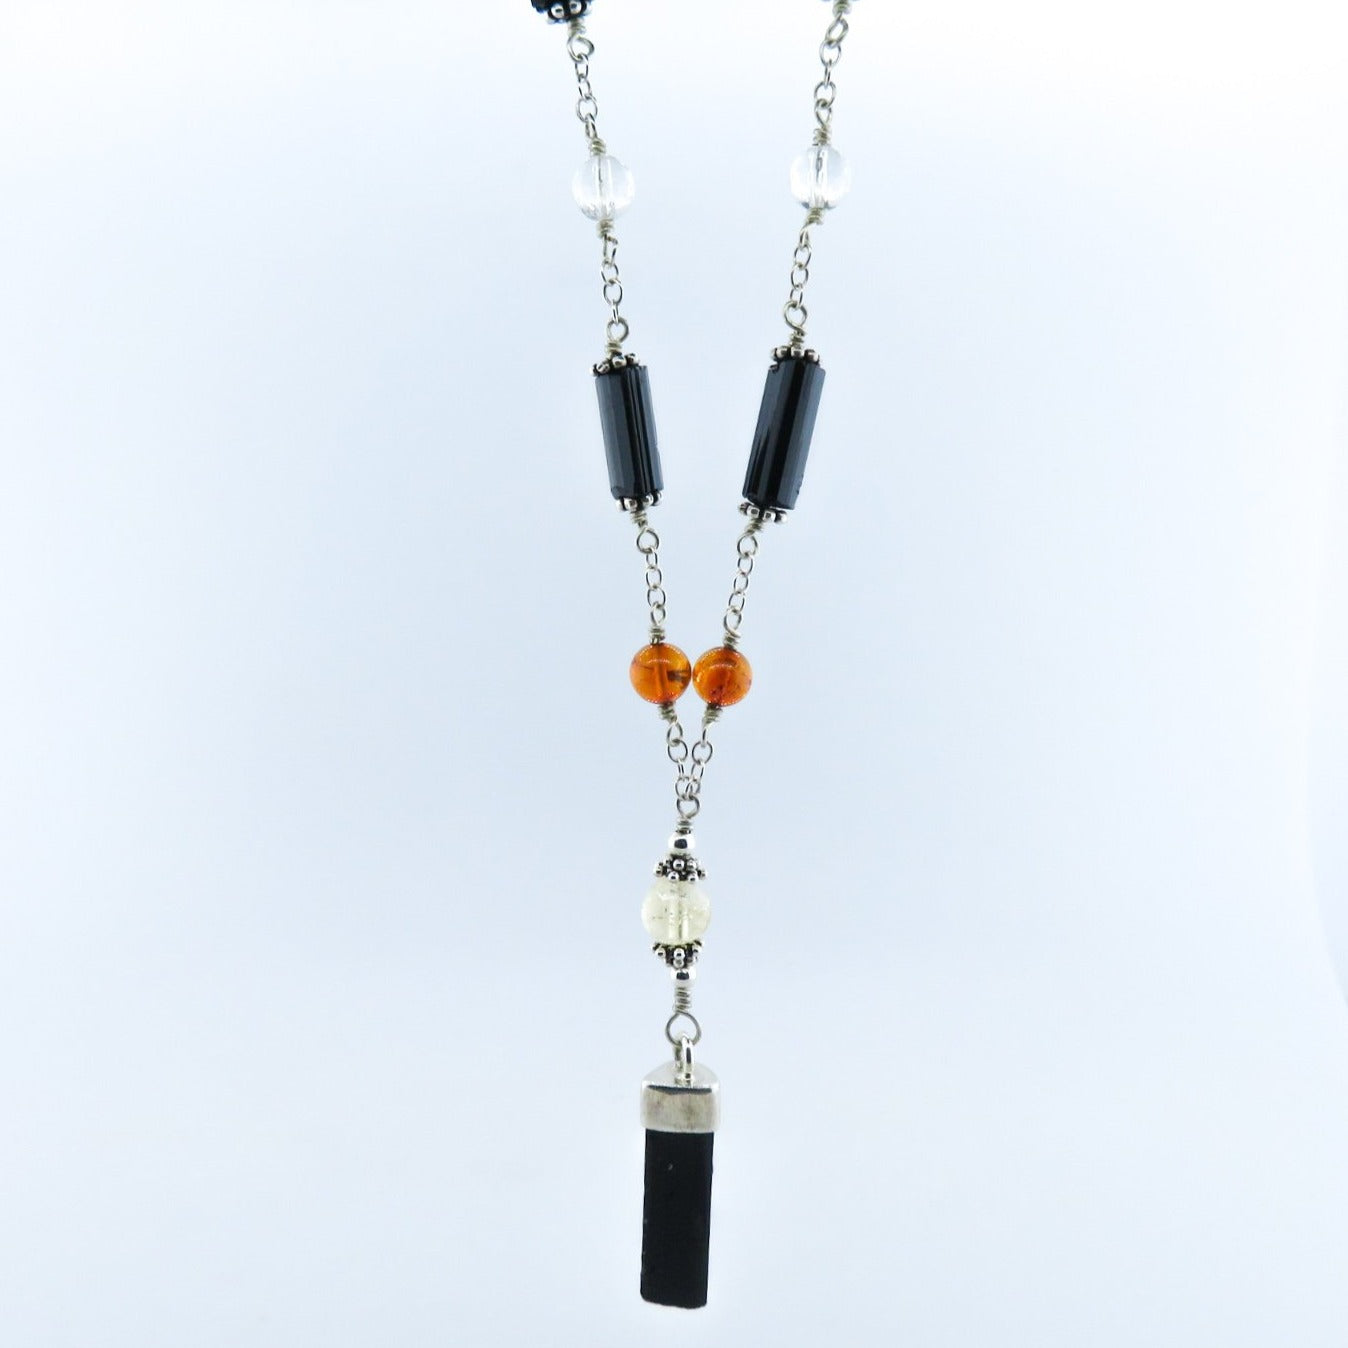 Black Tourmaline Necklace with Amber, Crystal, Citrine and Sterling Silver